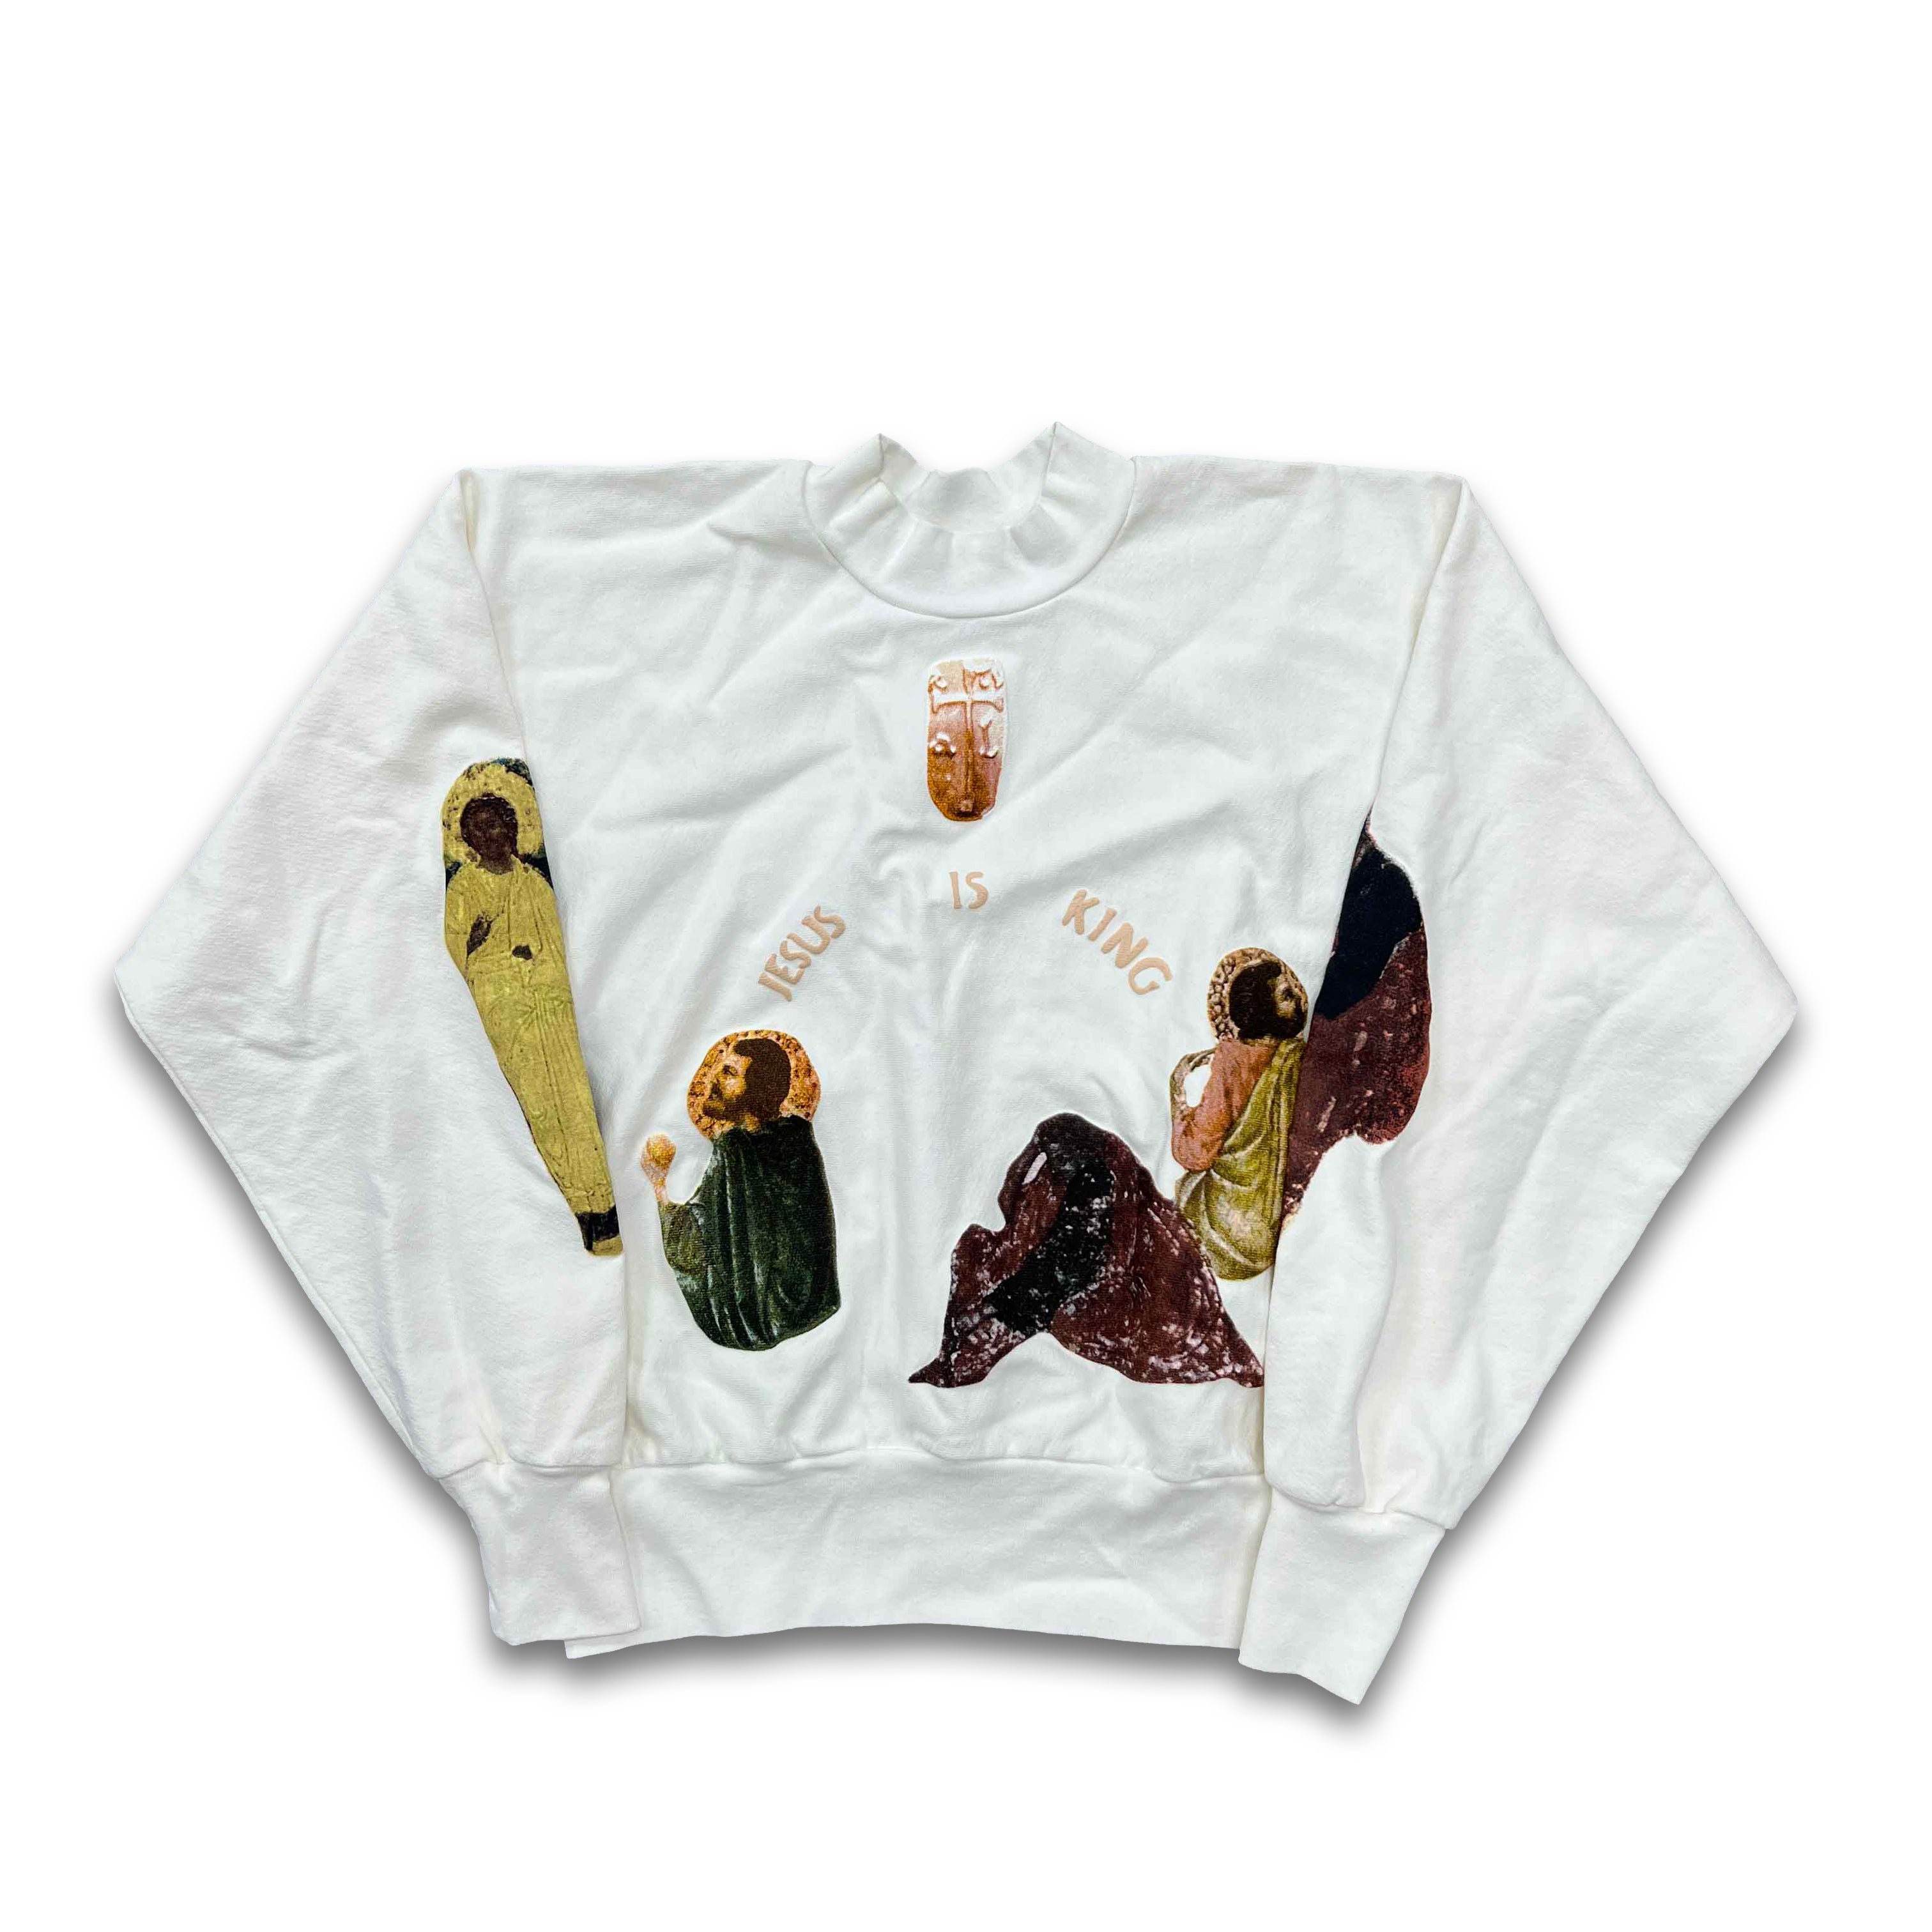 CPFM Crewneck Sweater "JESUS IS KING CROSS" White New (Cond) Size S